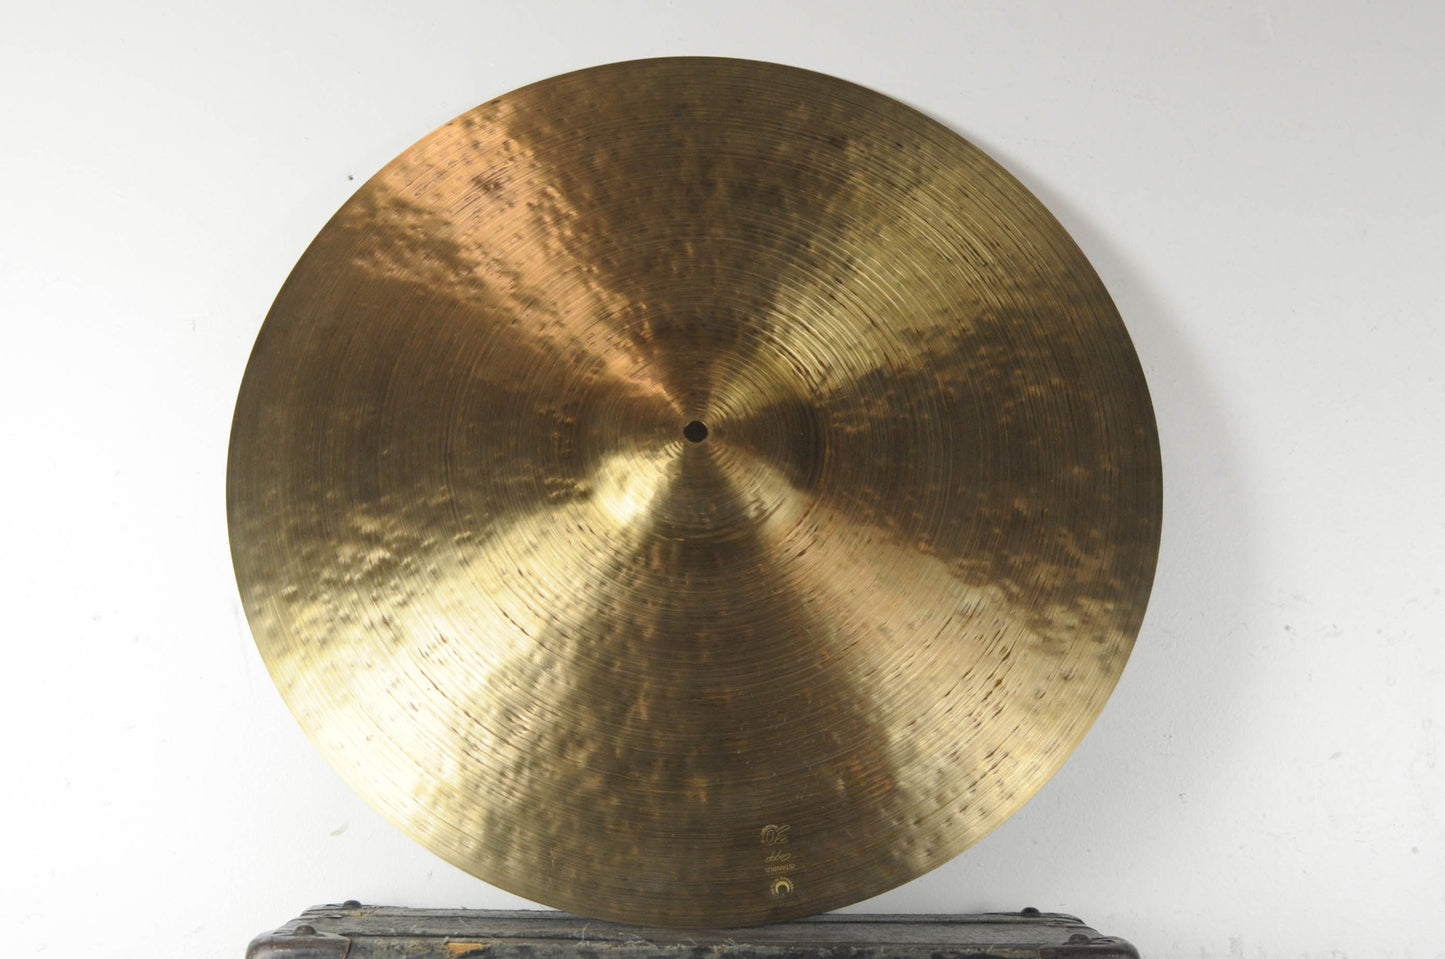 Istanbul Agop 22" 30th Anniversary Ride Cymbal 2290g